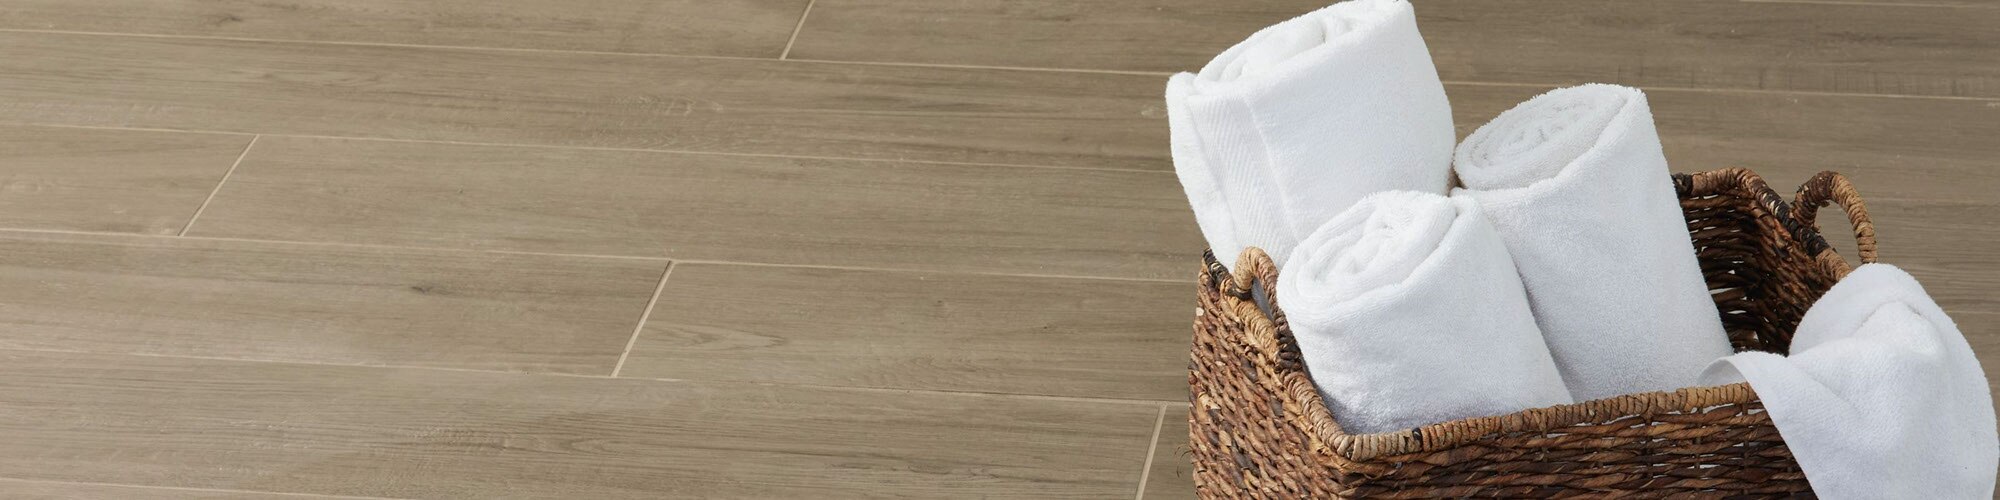 Closeup of wood look tile flooring planks with matching grout, natural wicker basket holding 3 rolled white towels.